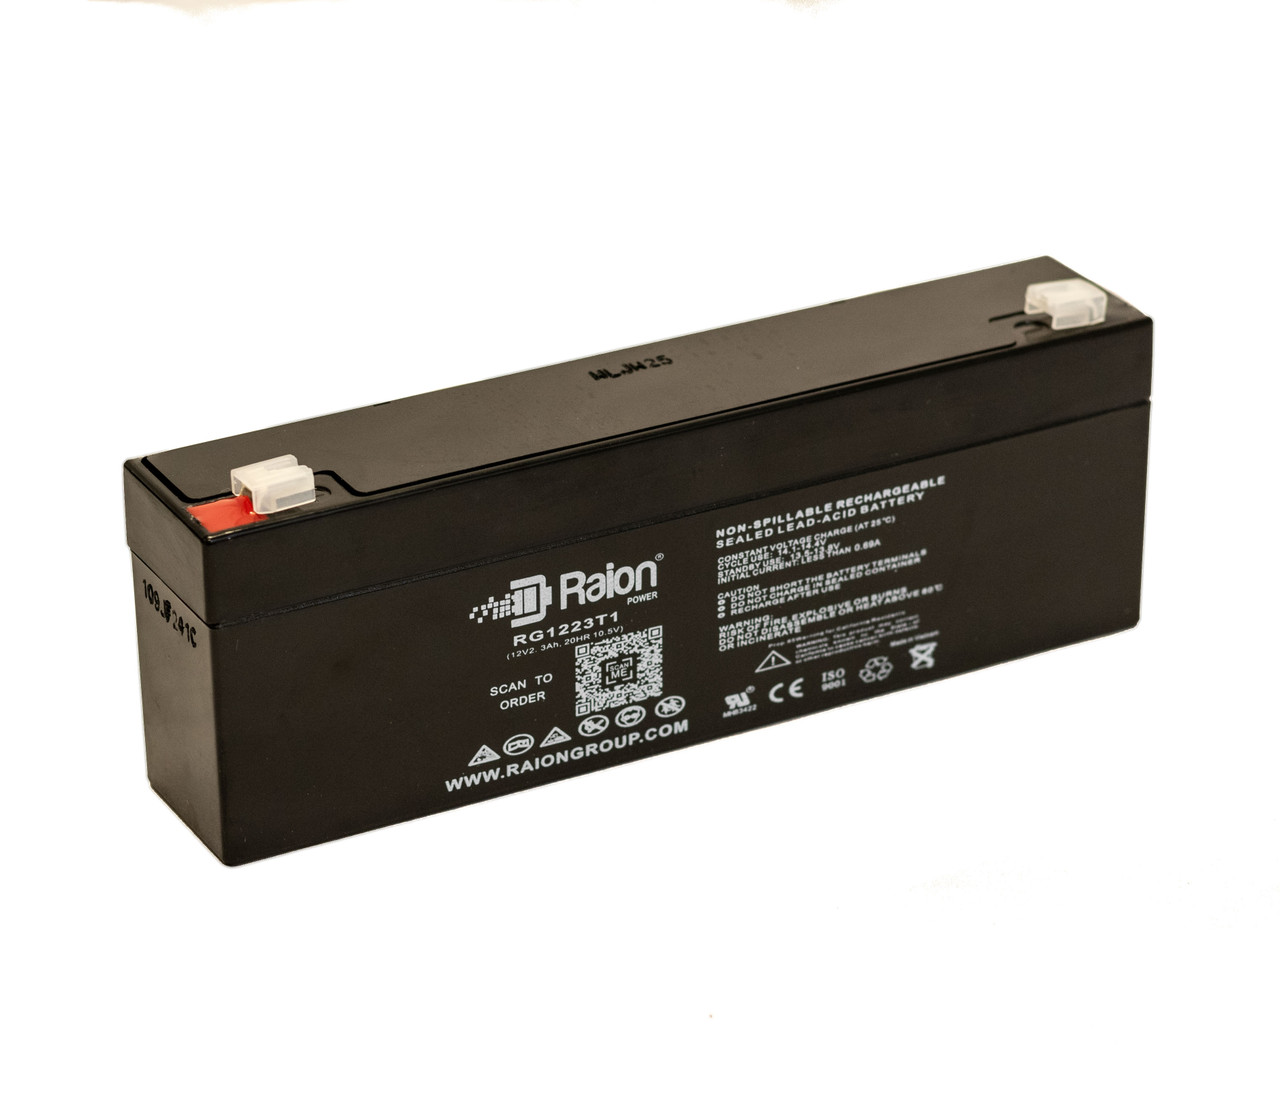 Raion Power RG1223T1 Replacement Battery for Elmed PSO 100 Pulseoximeter